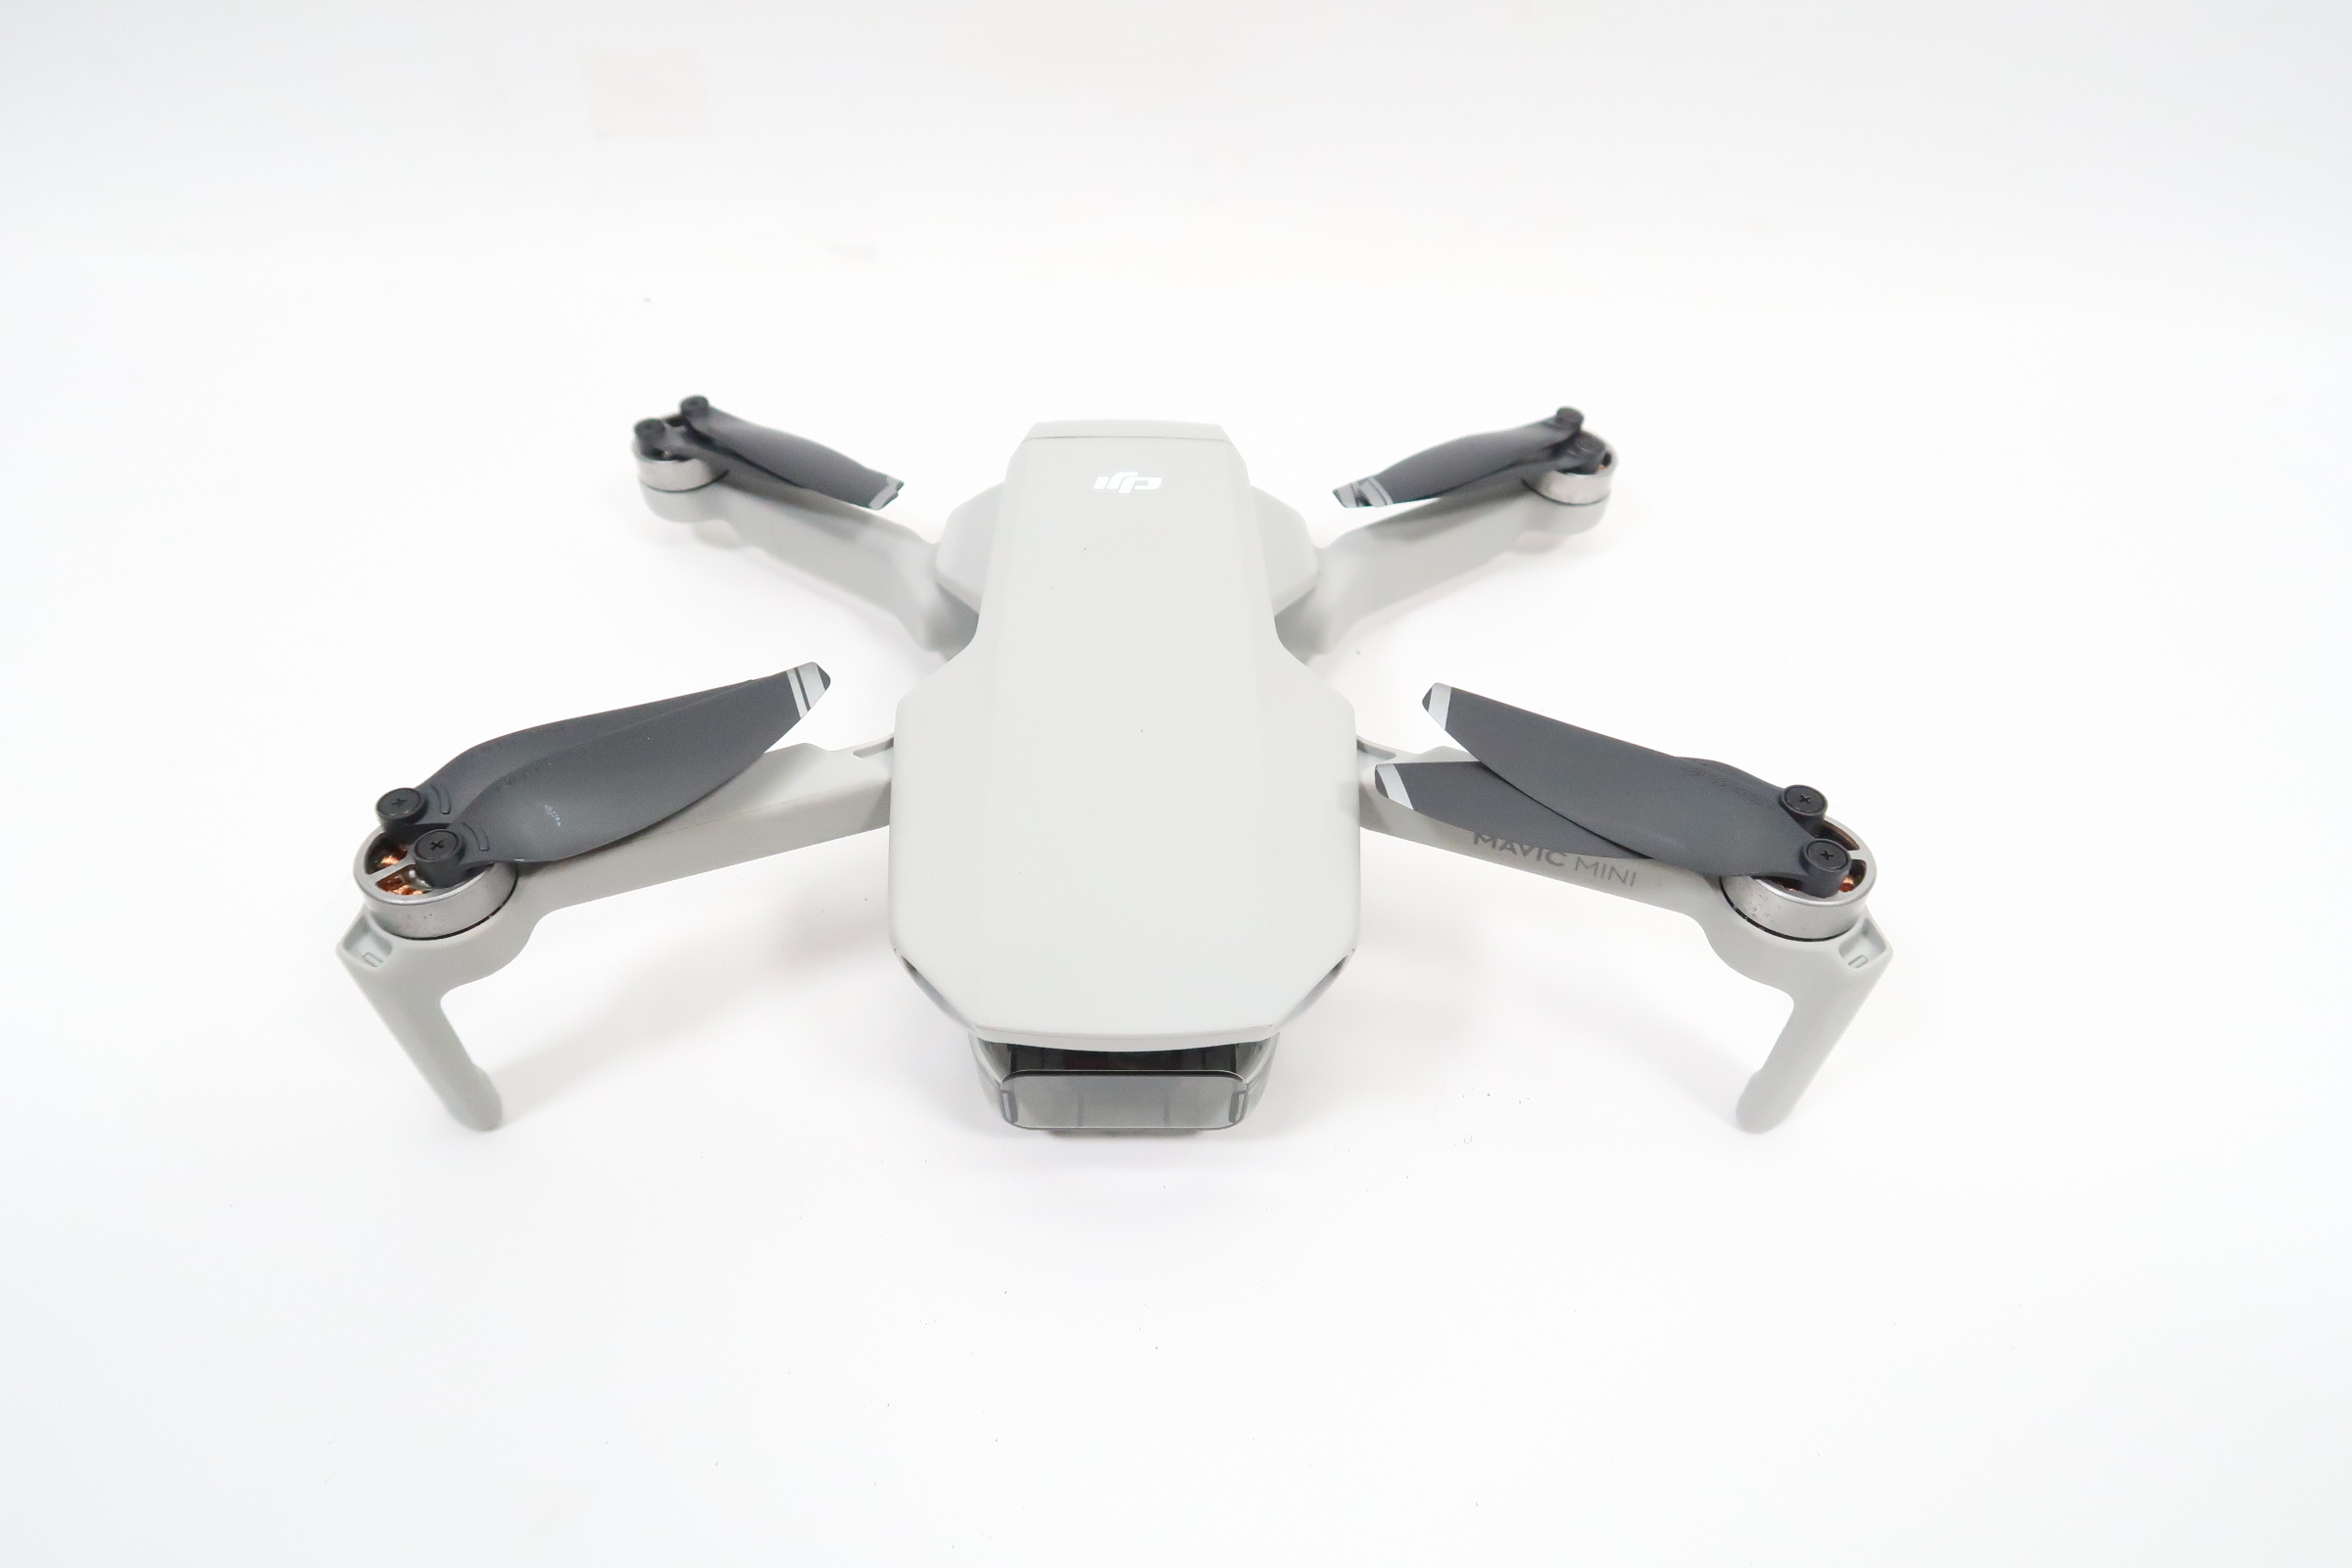 DJI Mavic Mini Ready to Fly Drone - White (MT1SS5) for sale online